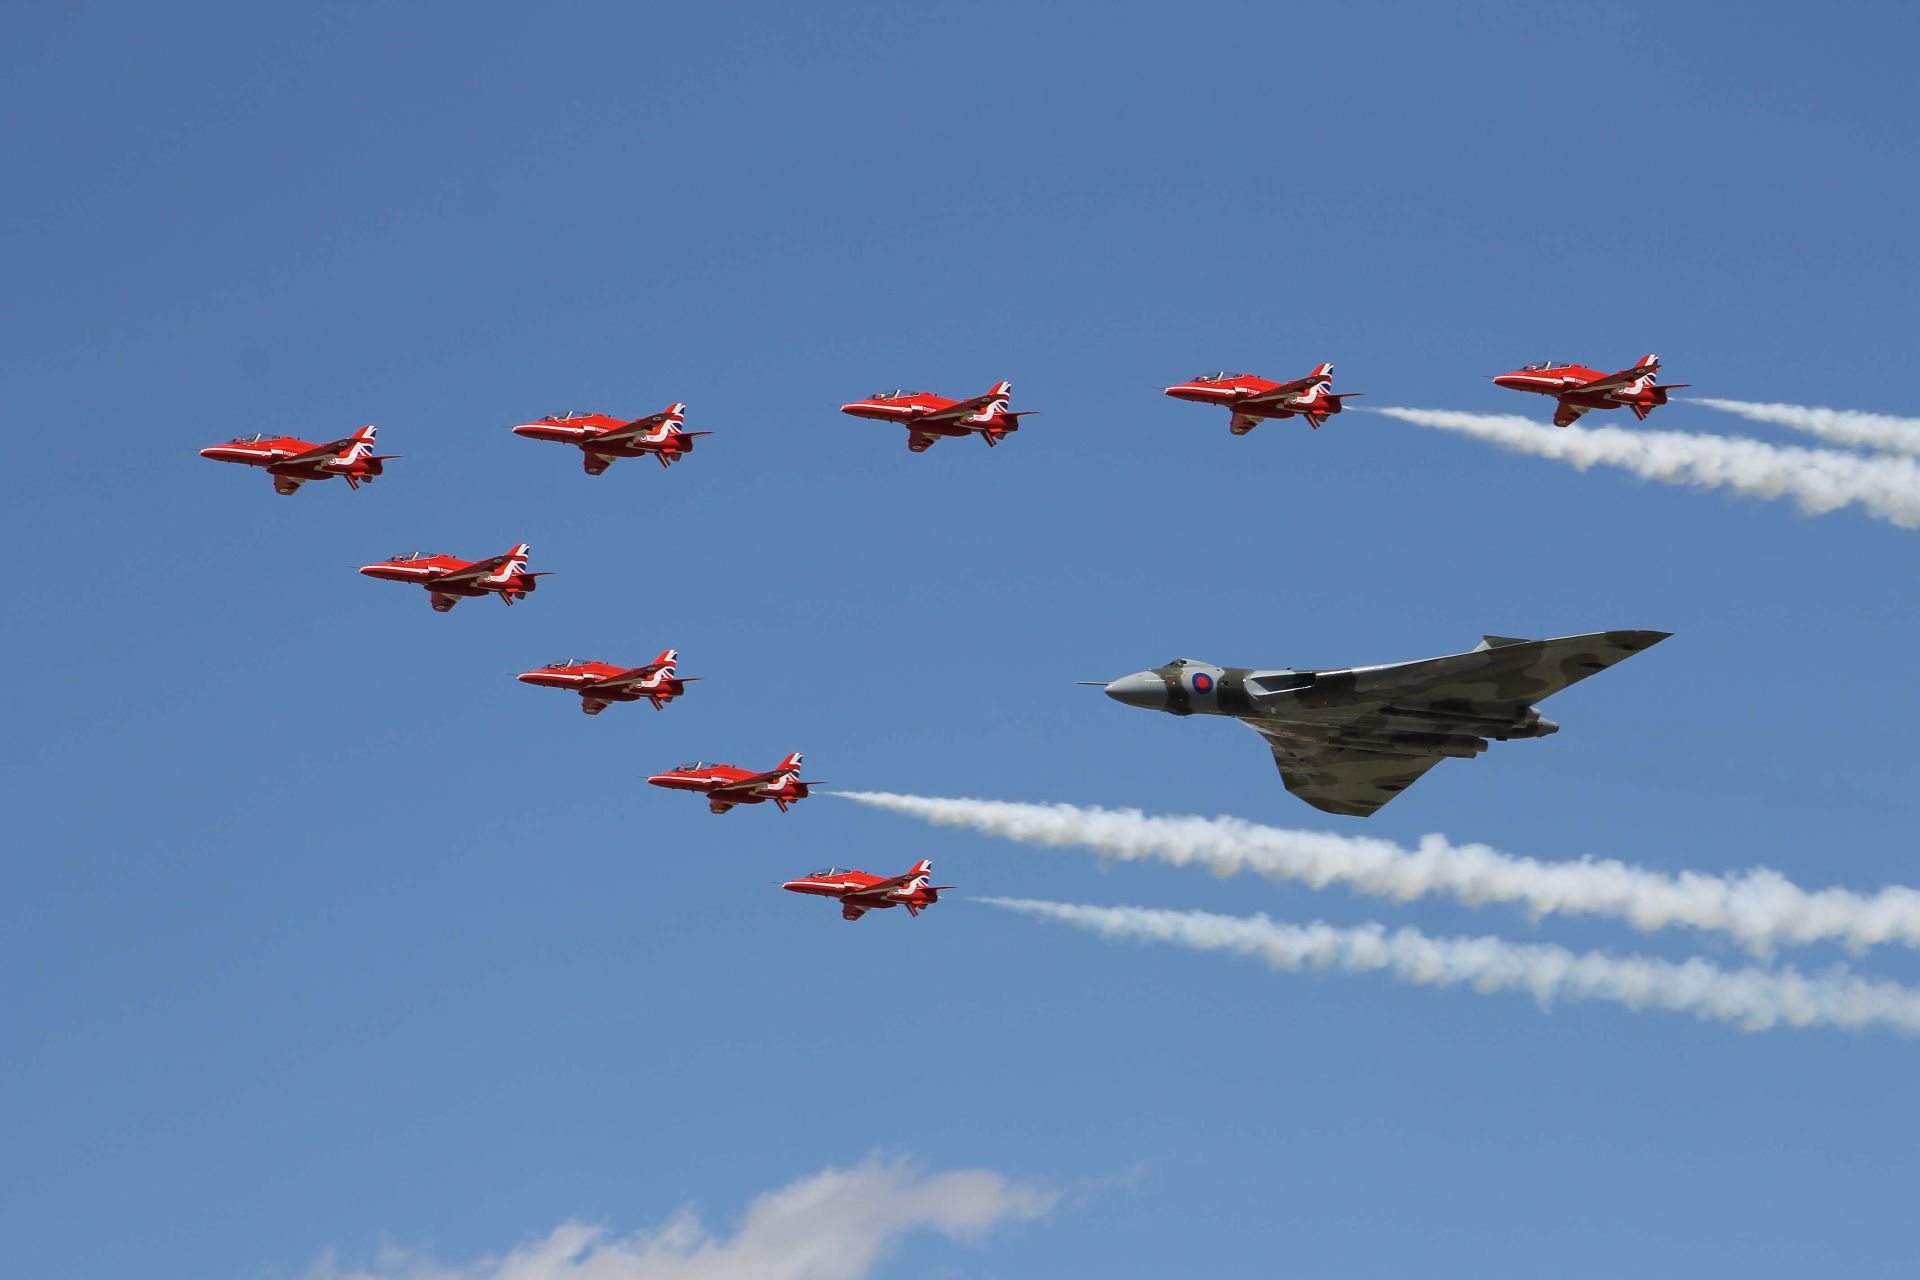 Last year of the Vulcan with Red Arrows